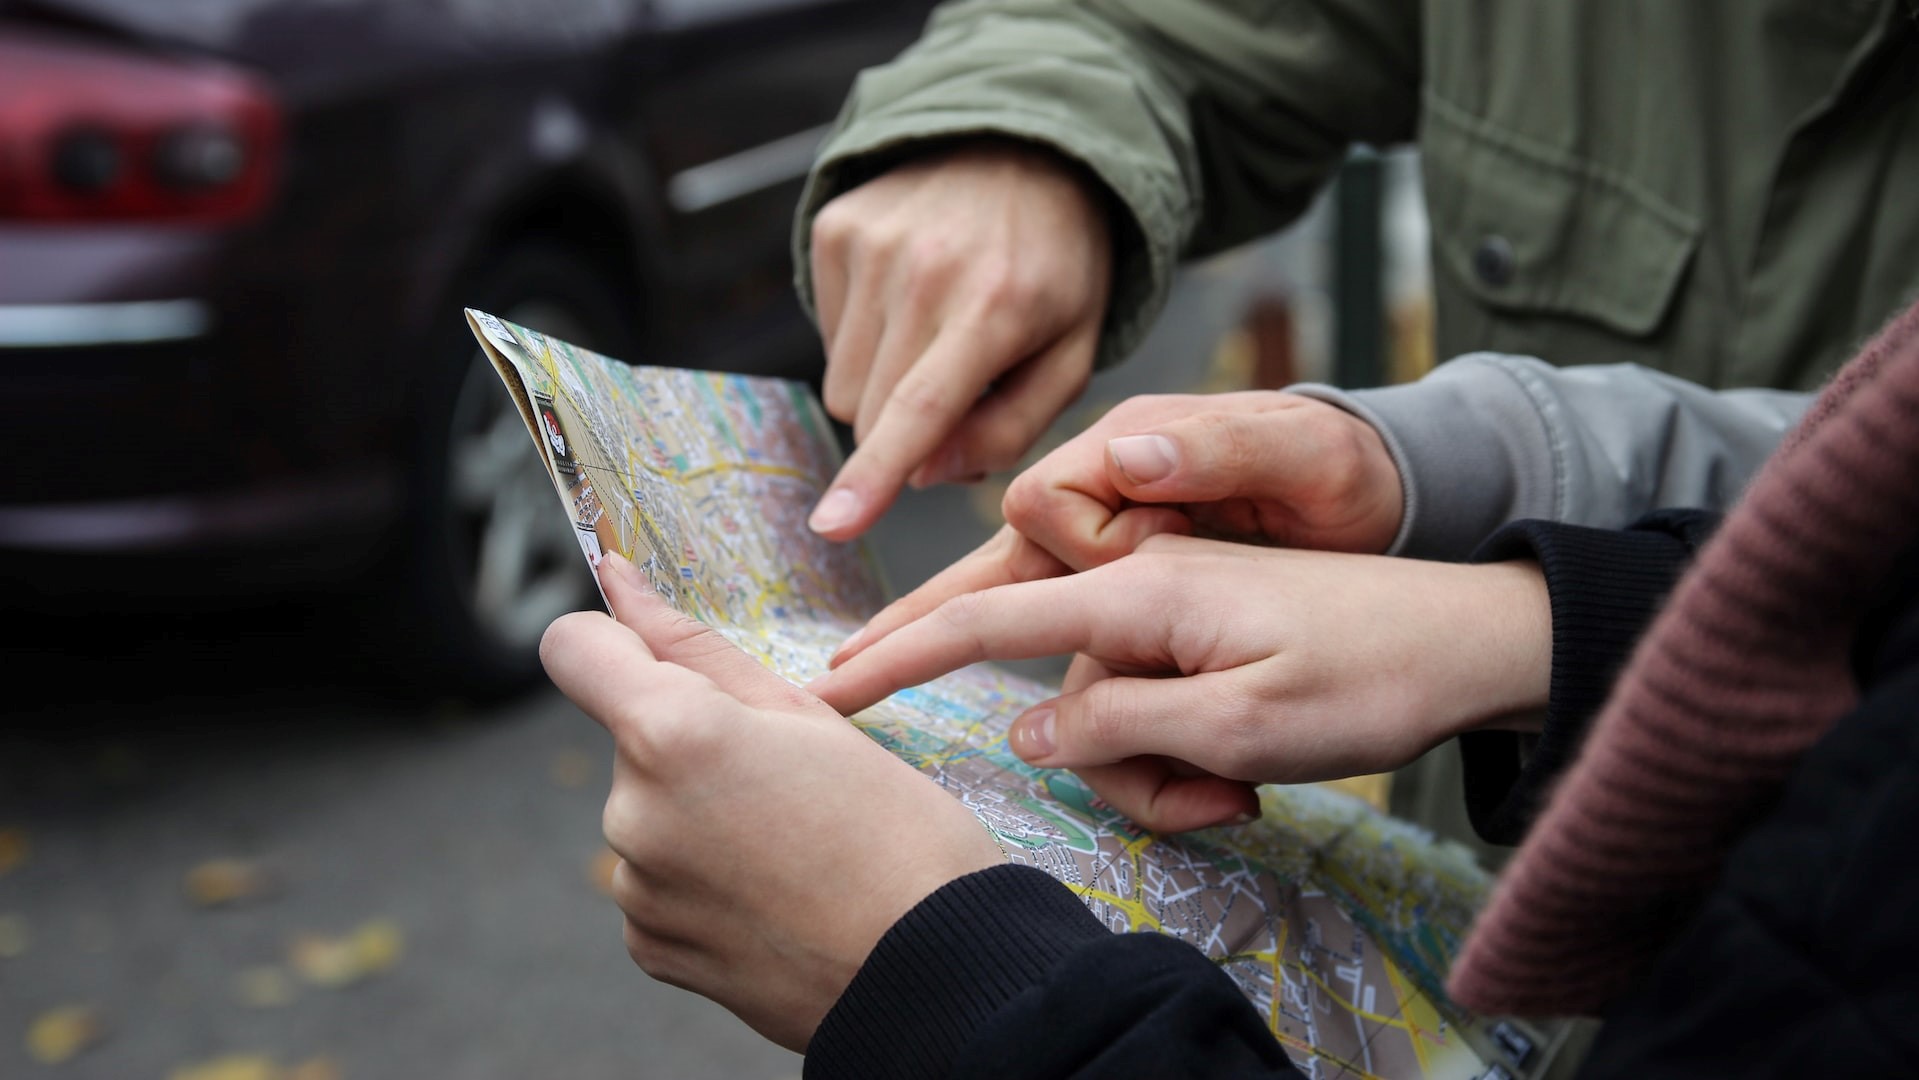 People pointing to a location on a paper map.